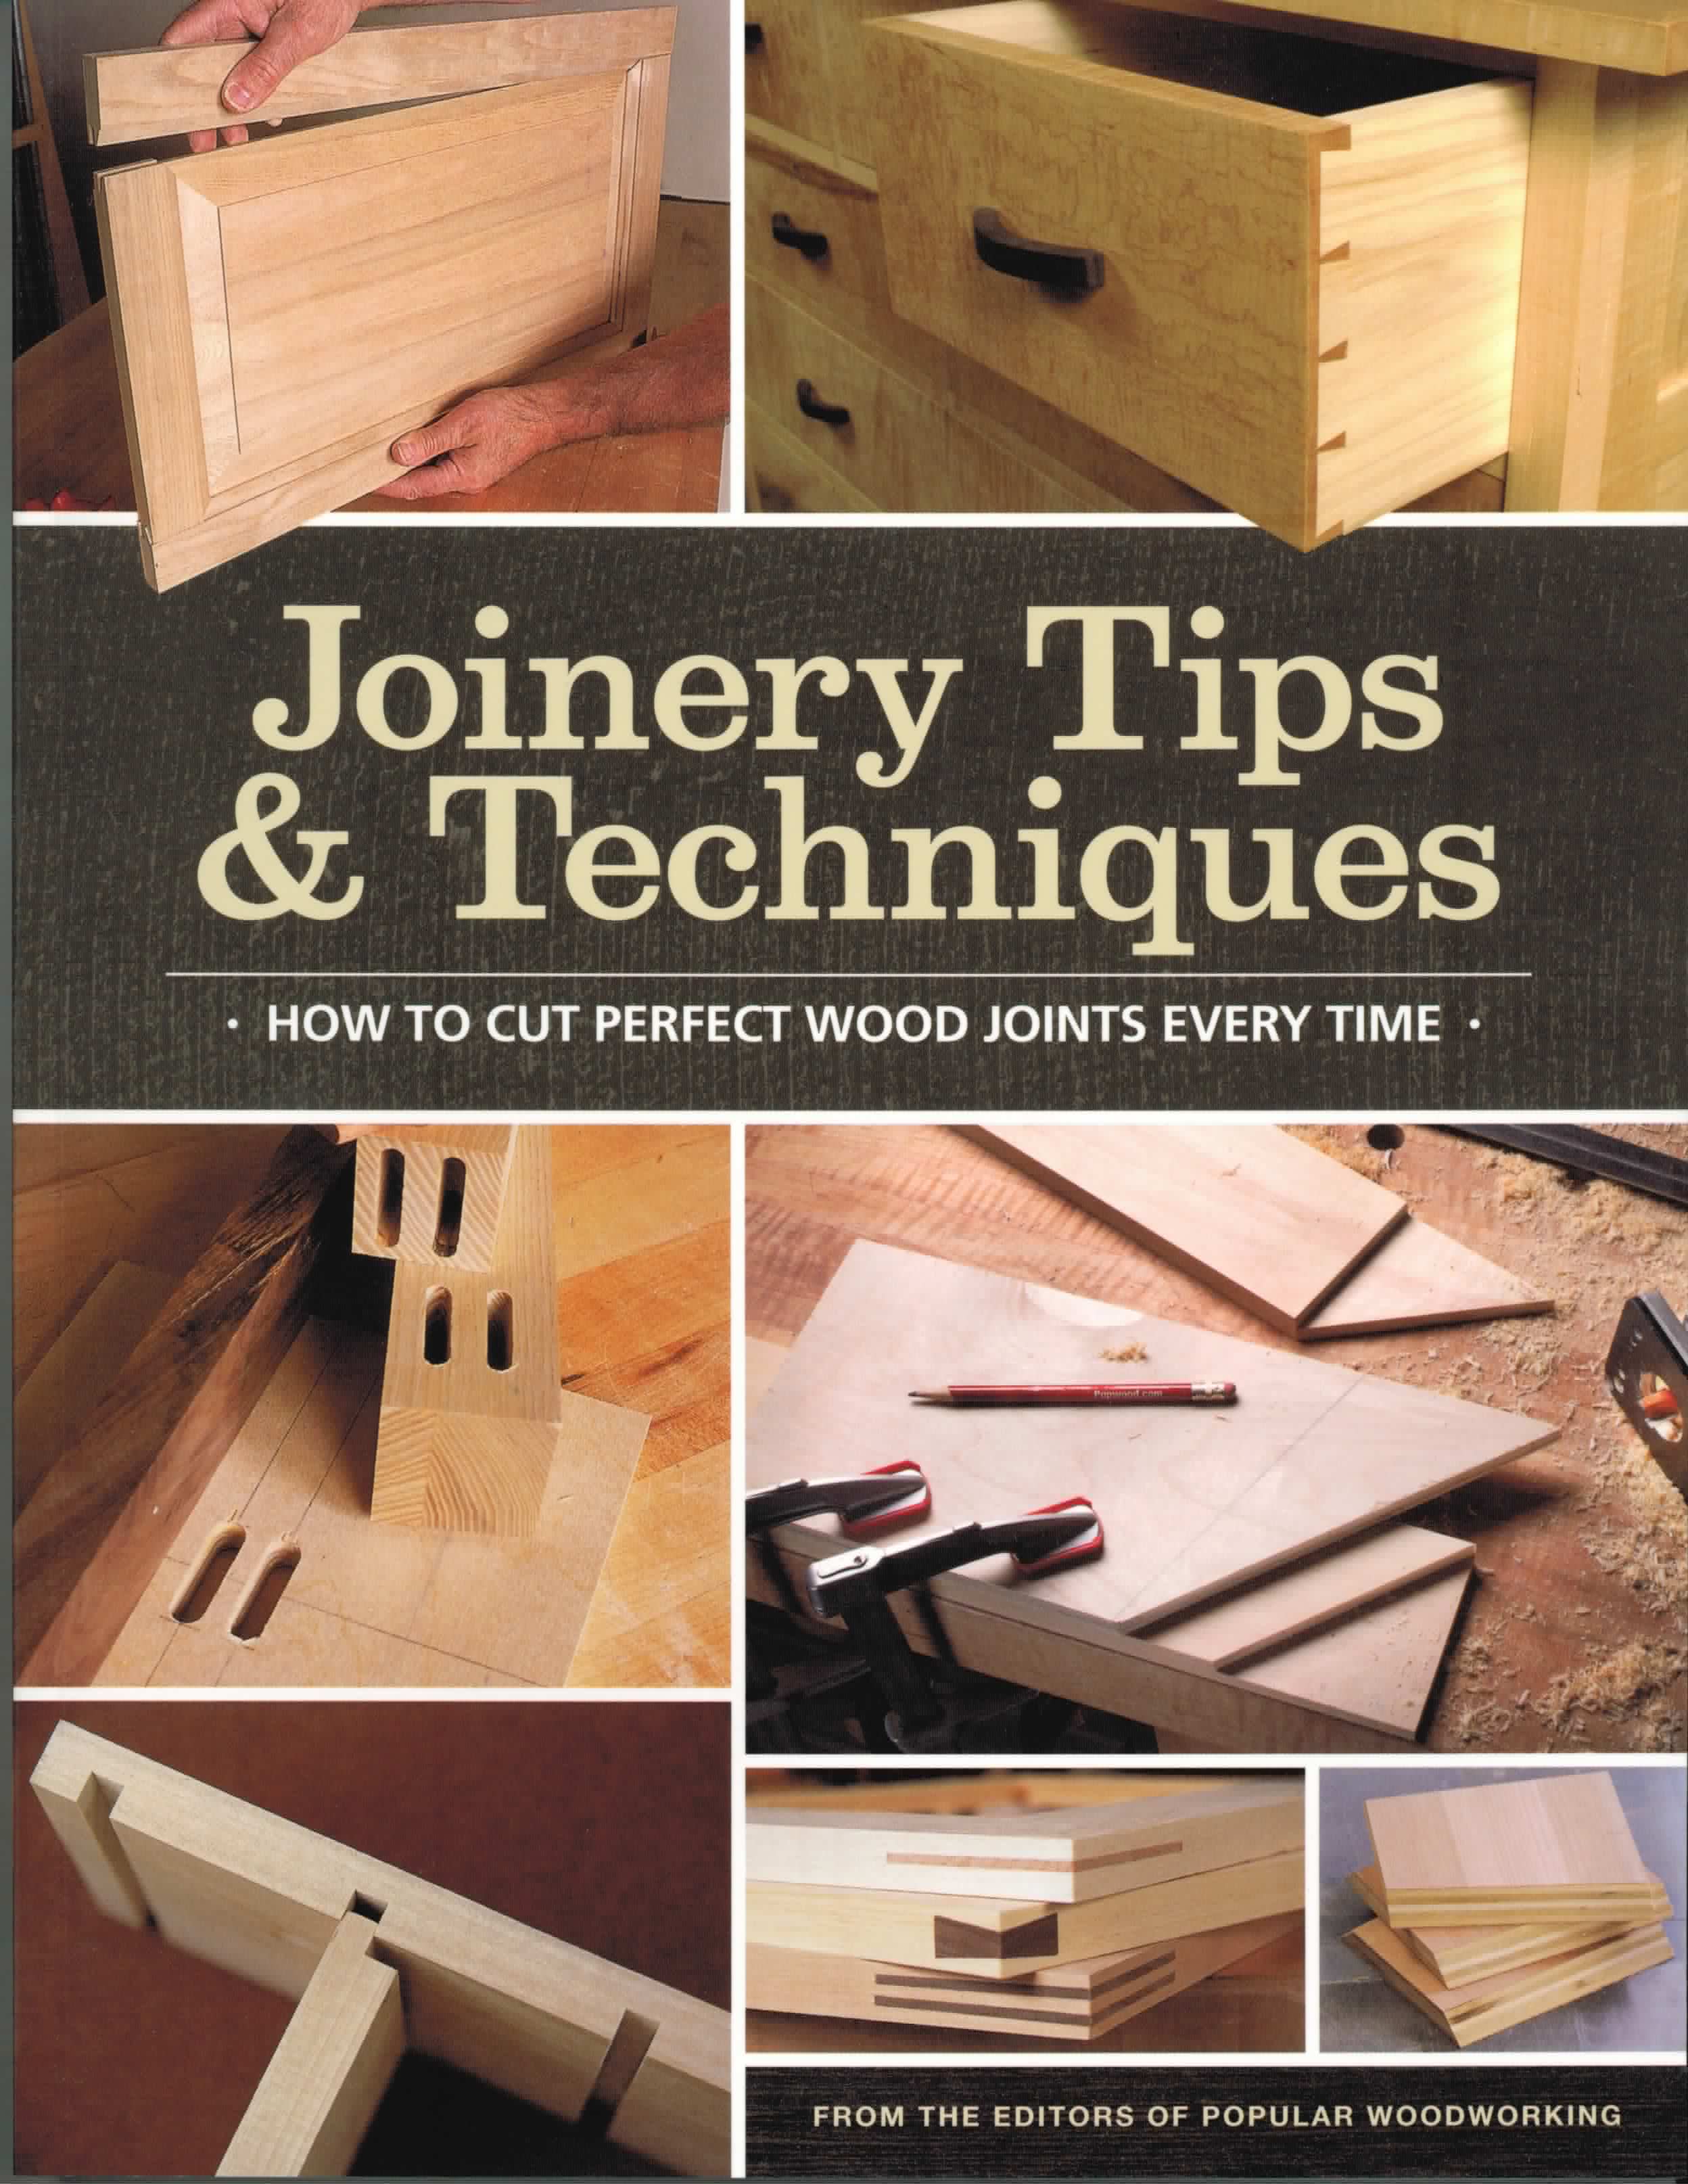 Woodworking how to books Main Image